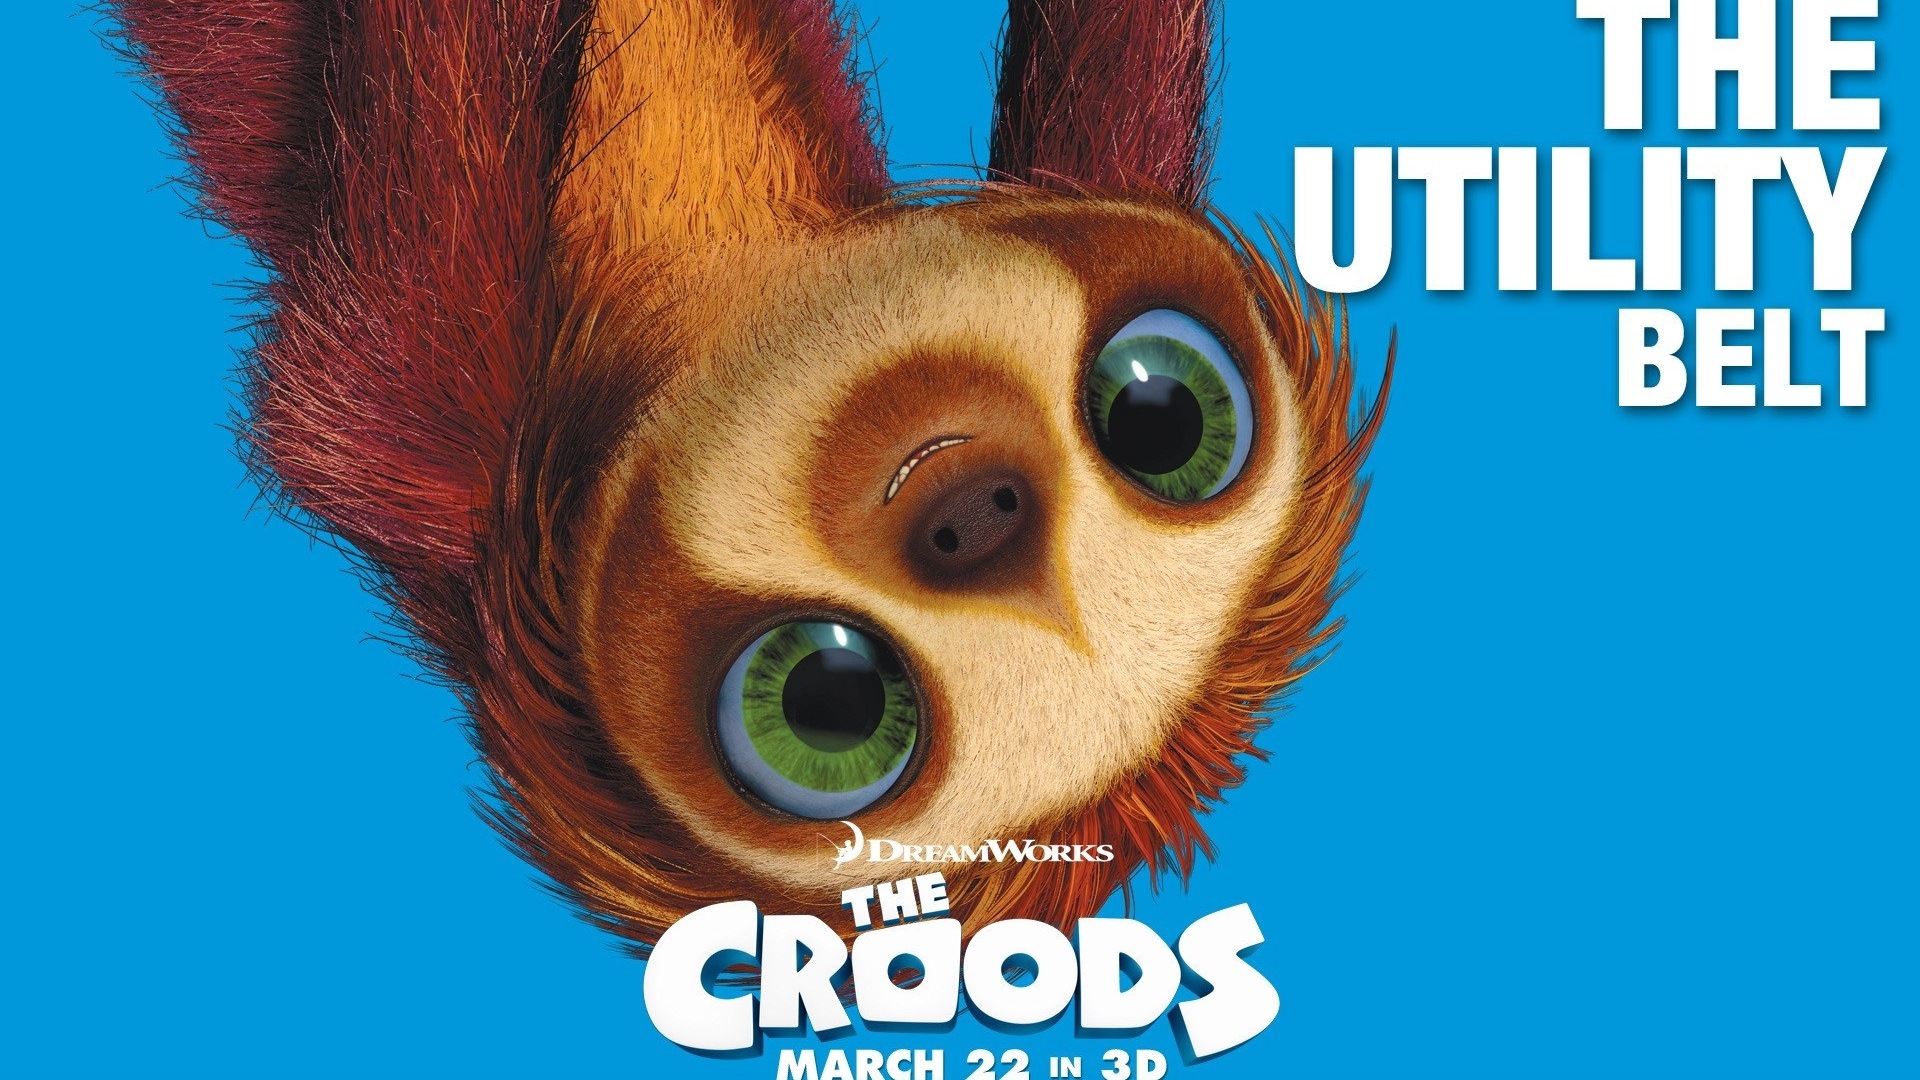 The Croods HD movie wallpapers #14 - 1920x1080